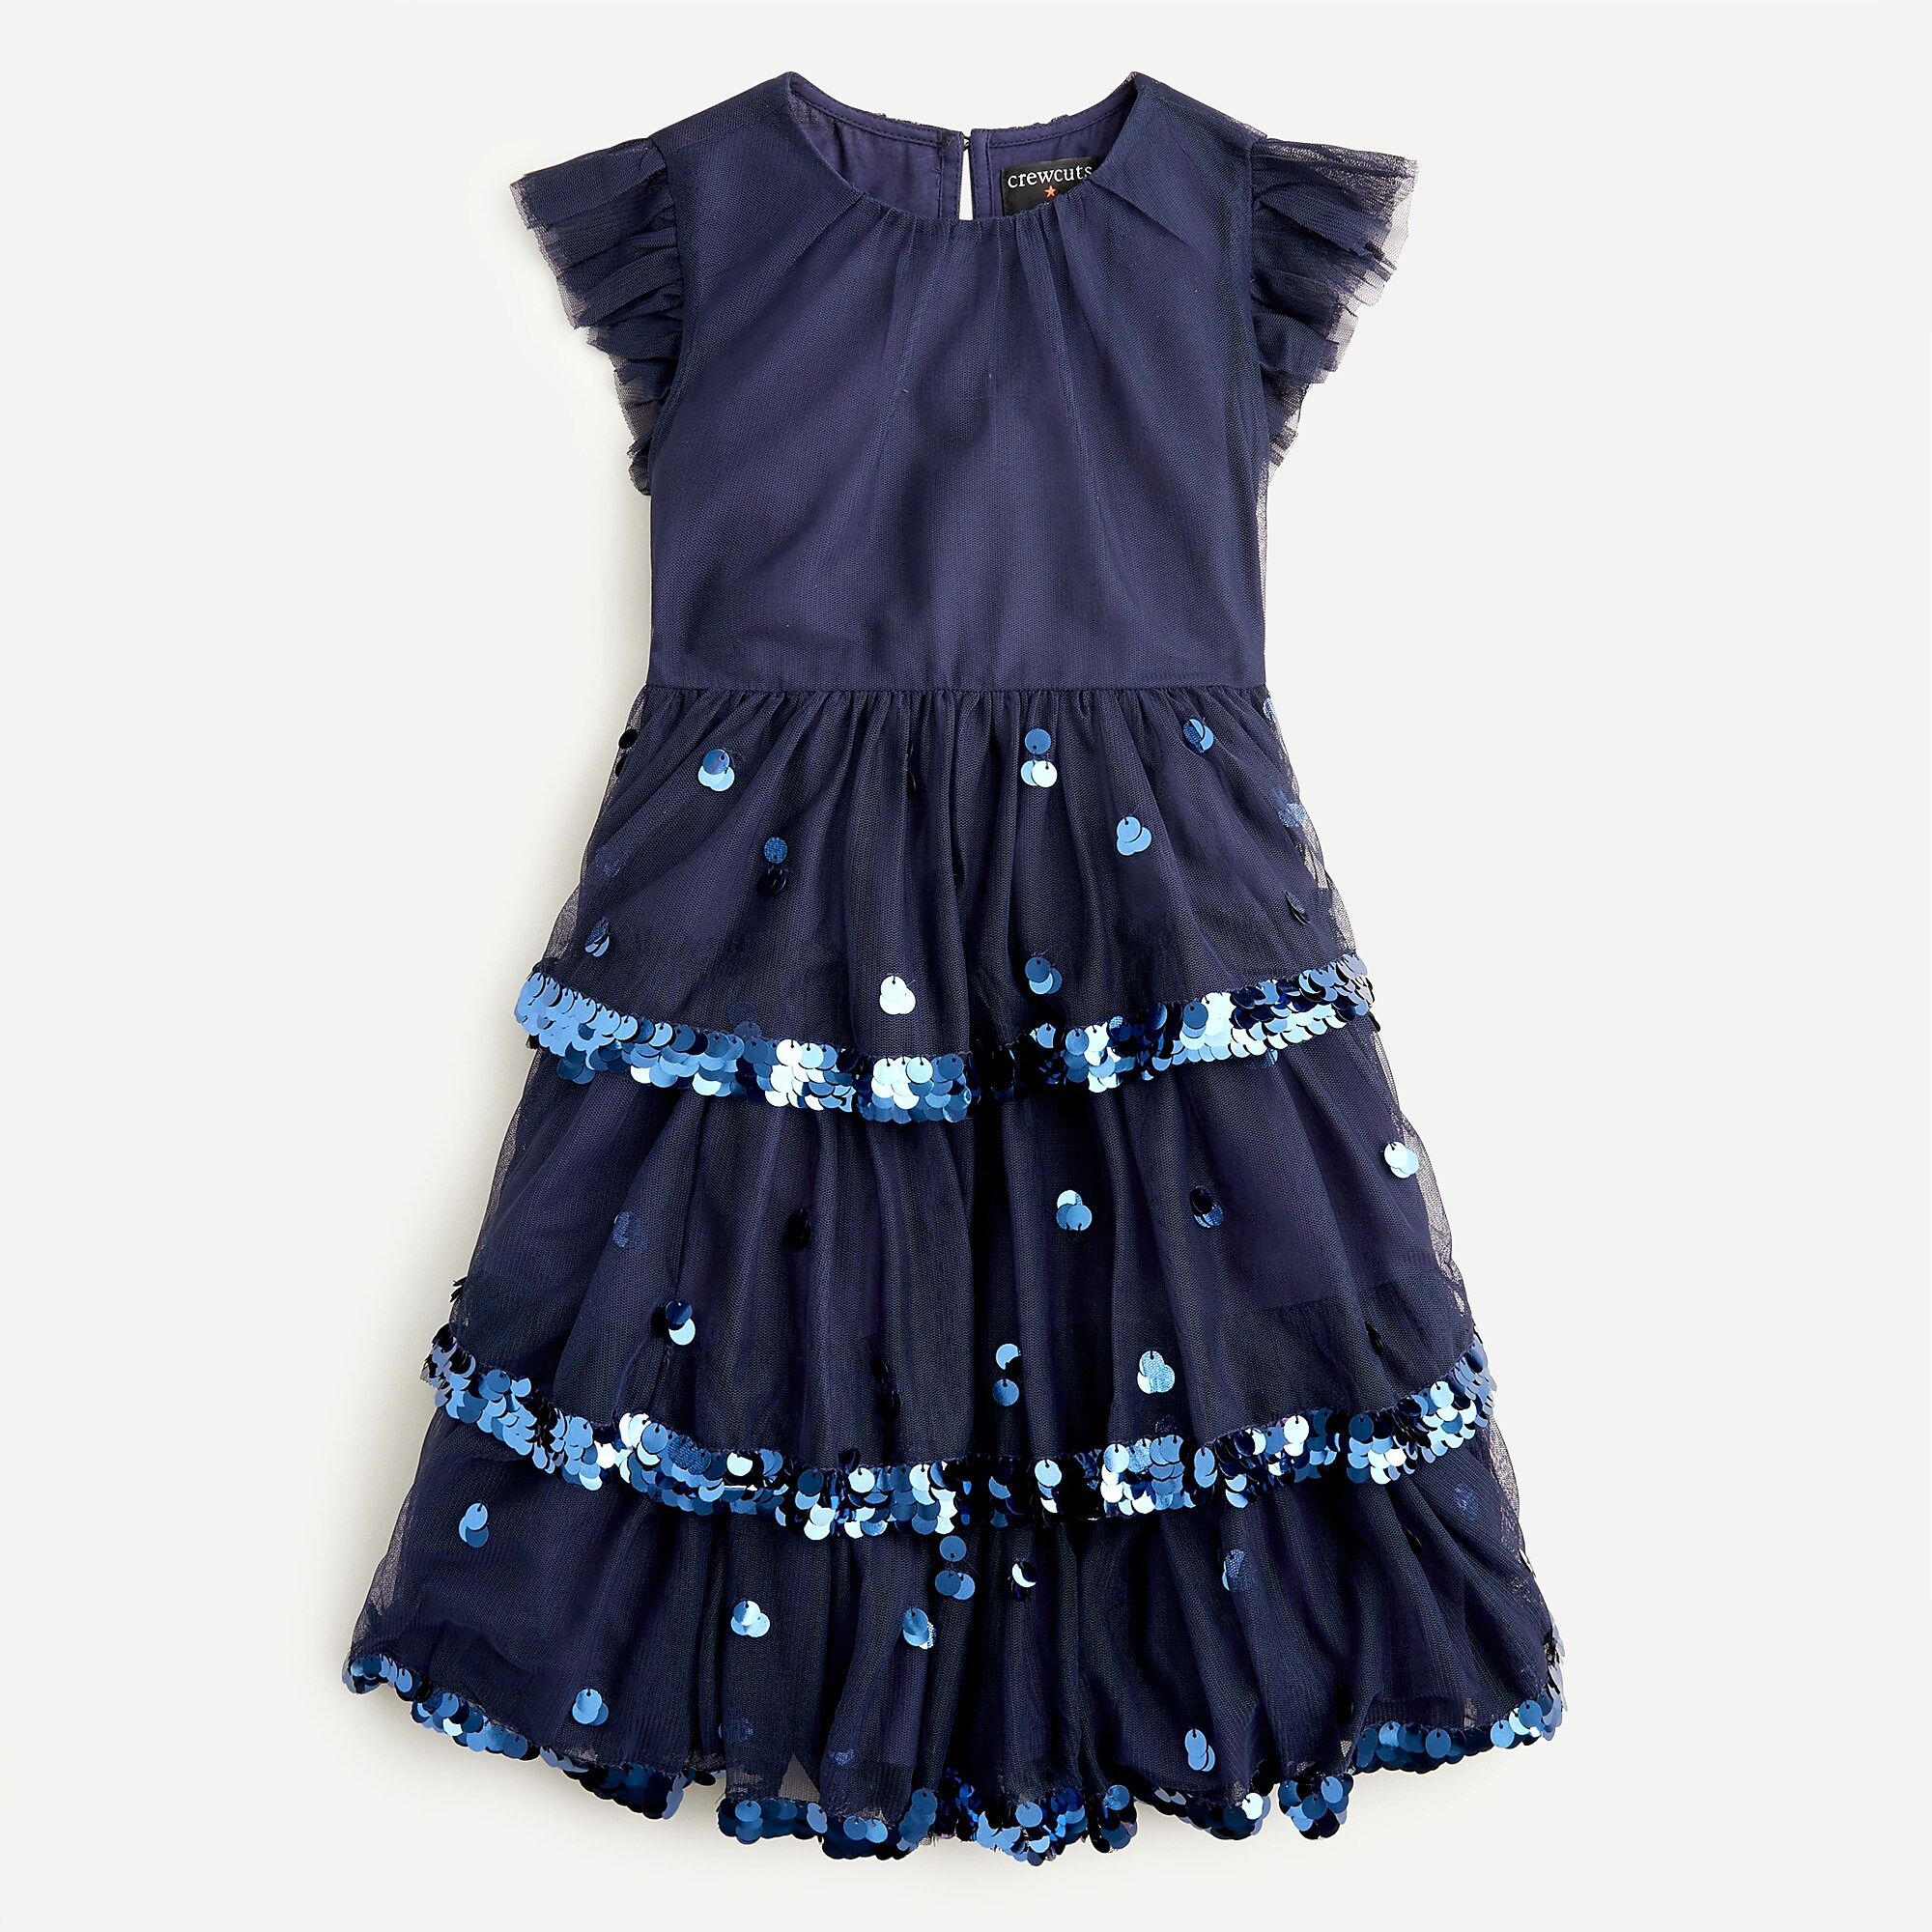 Girls' tiered tulle dress with paillettes | J.Crew US